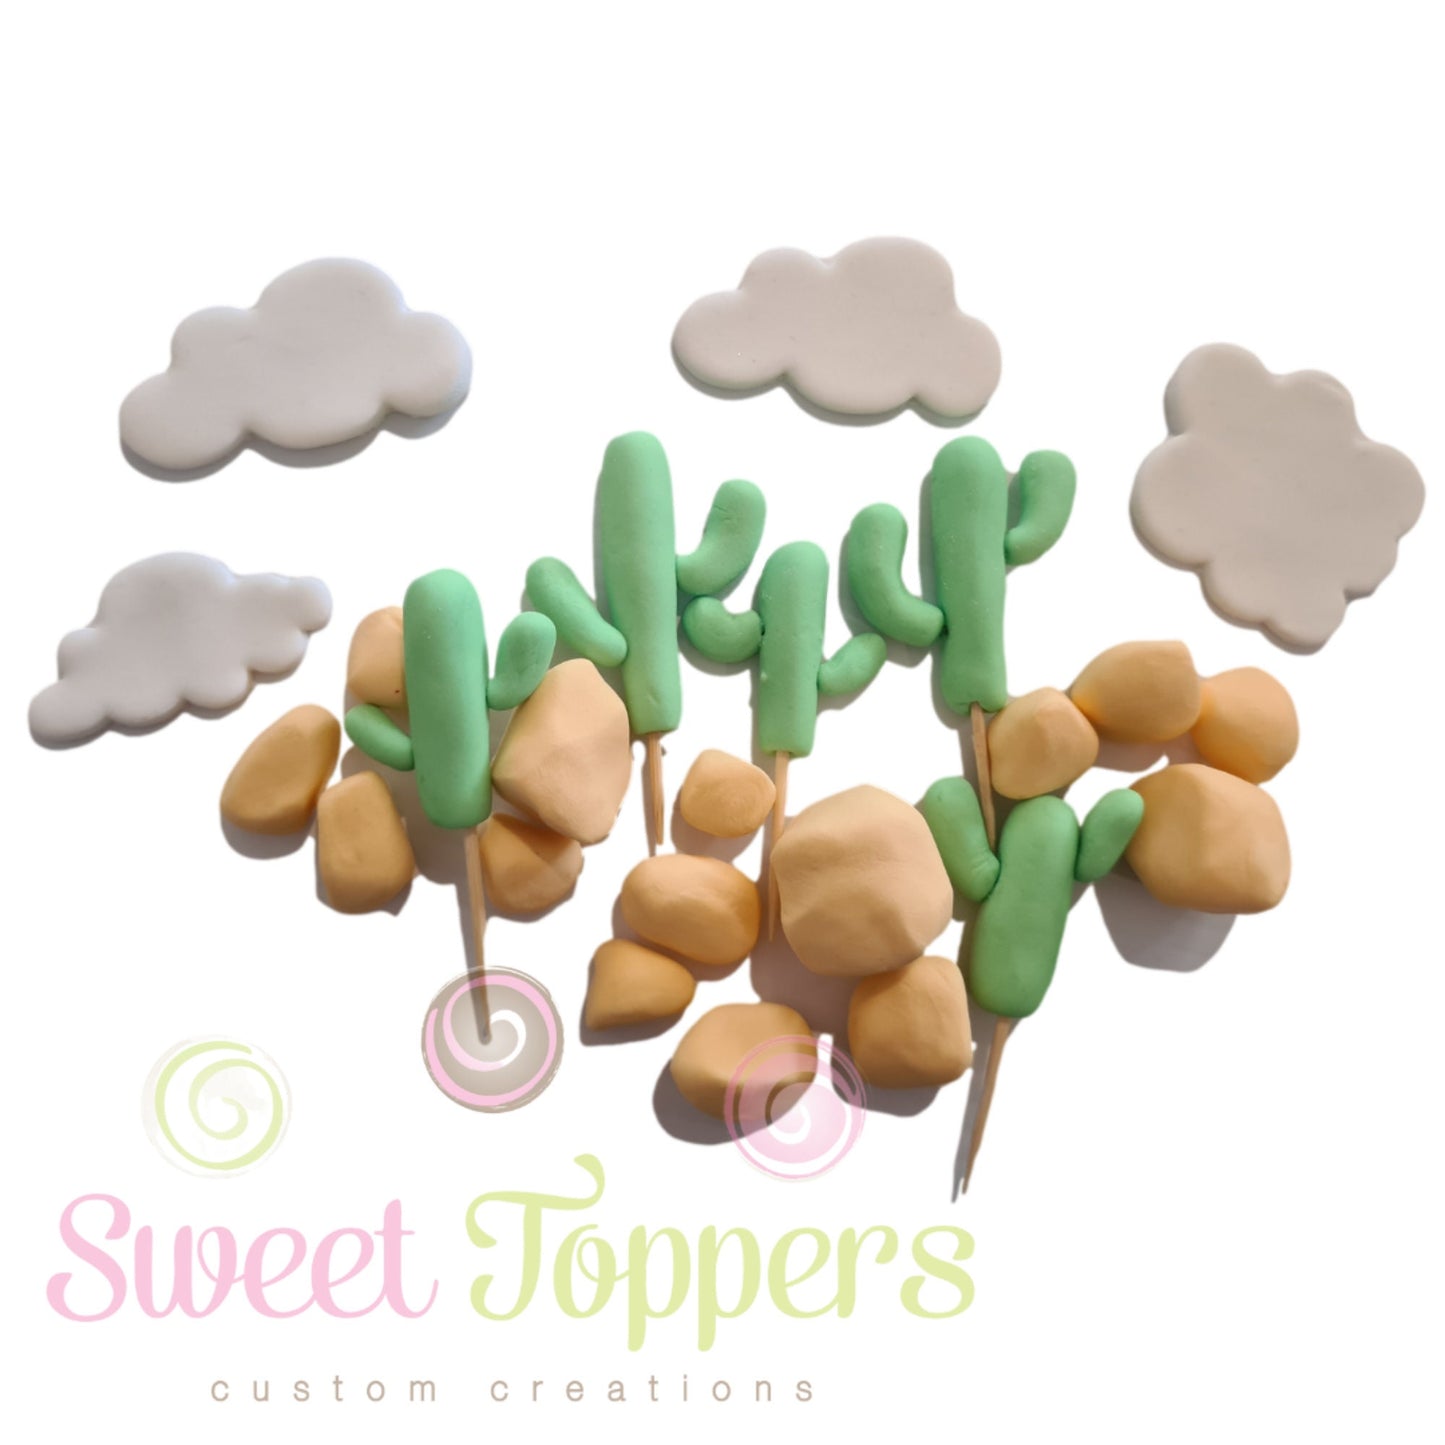 Desert themed cactus clouds Cars edible cake topper